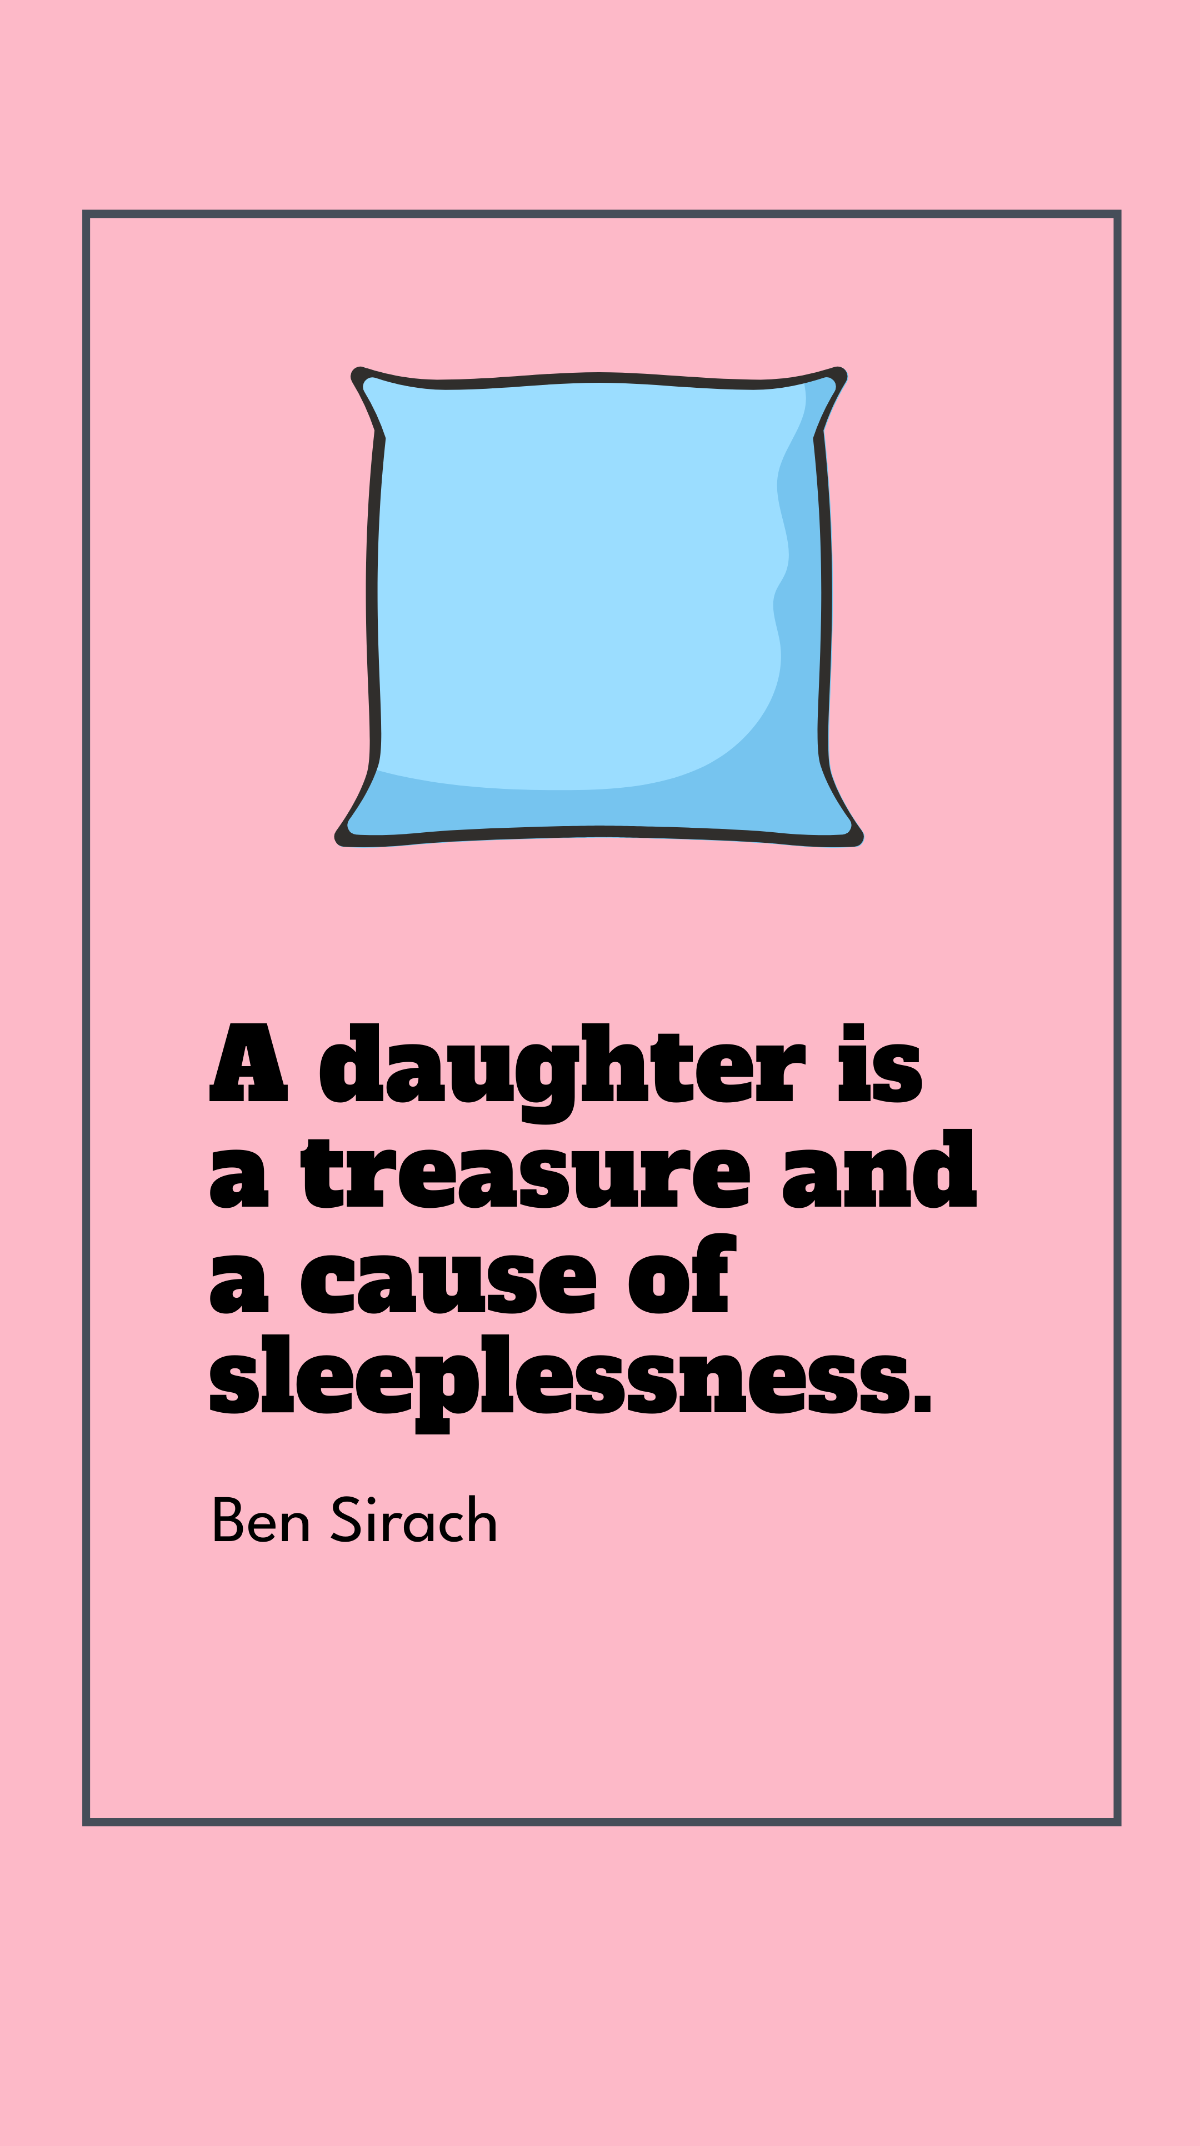 Free Ben Sirach - A daughter is a treasure and a cause of sleeplessness. Template